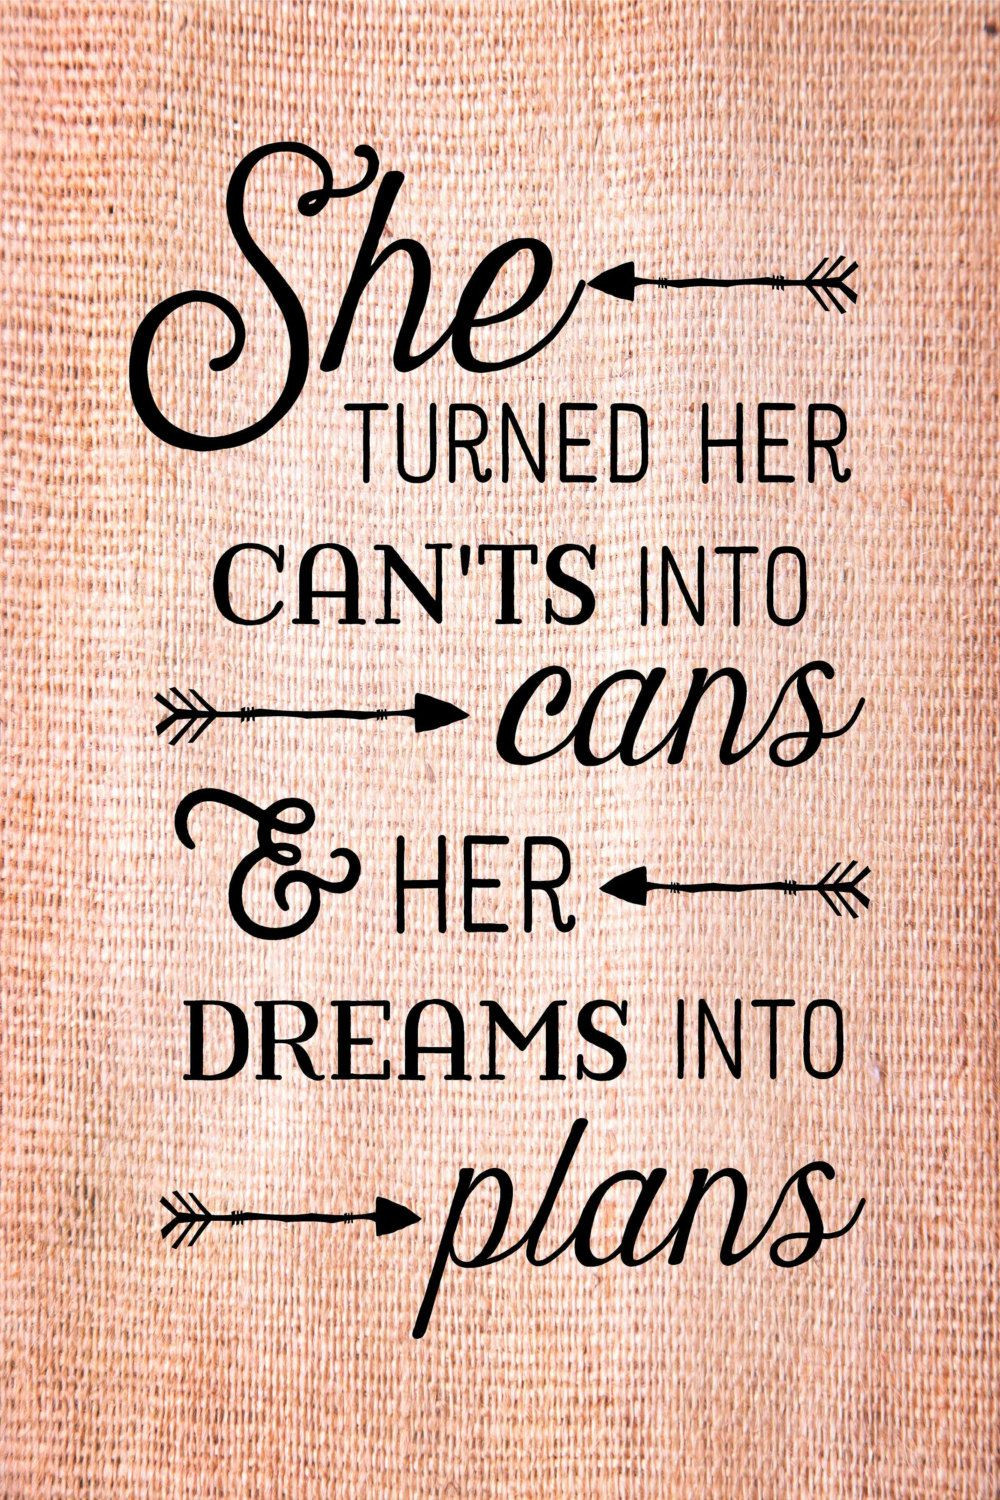 Inspiring Graduation Quotes
 Graduation Gift She turned her can ts into cans dreams